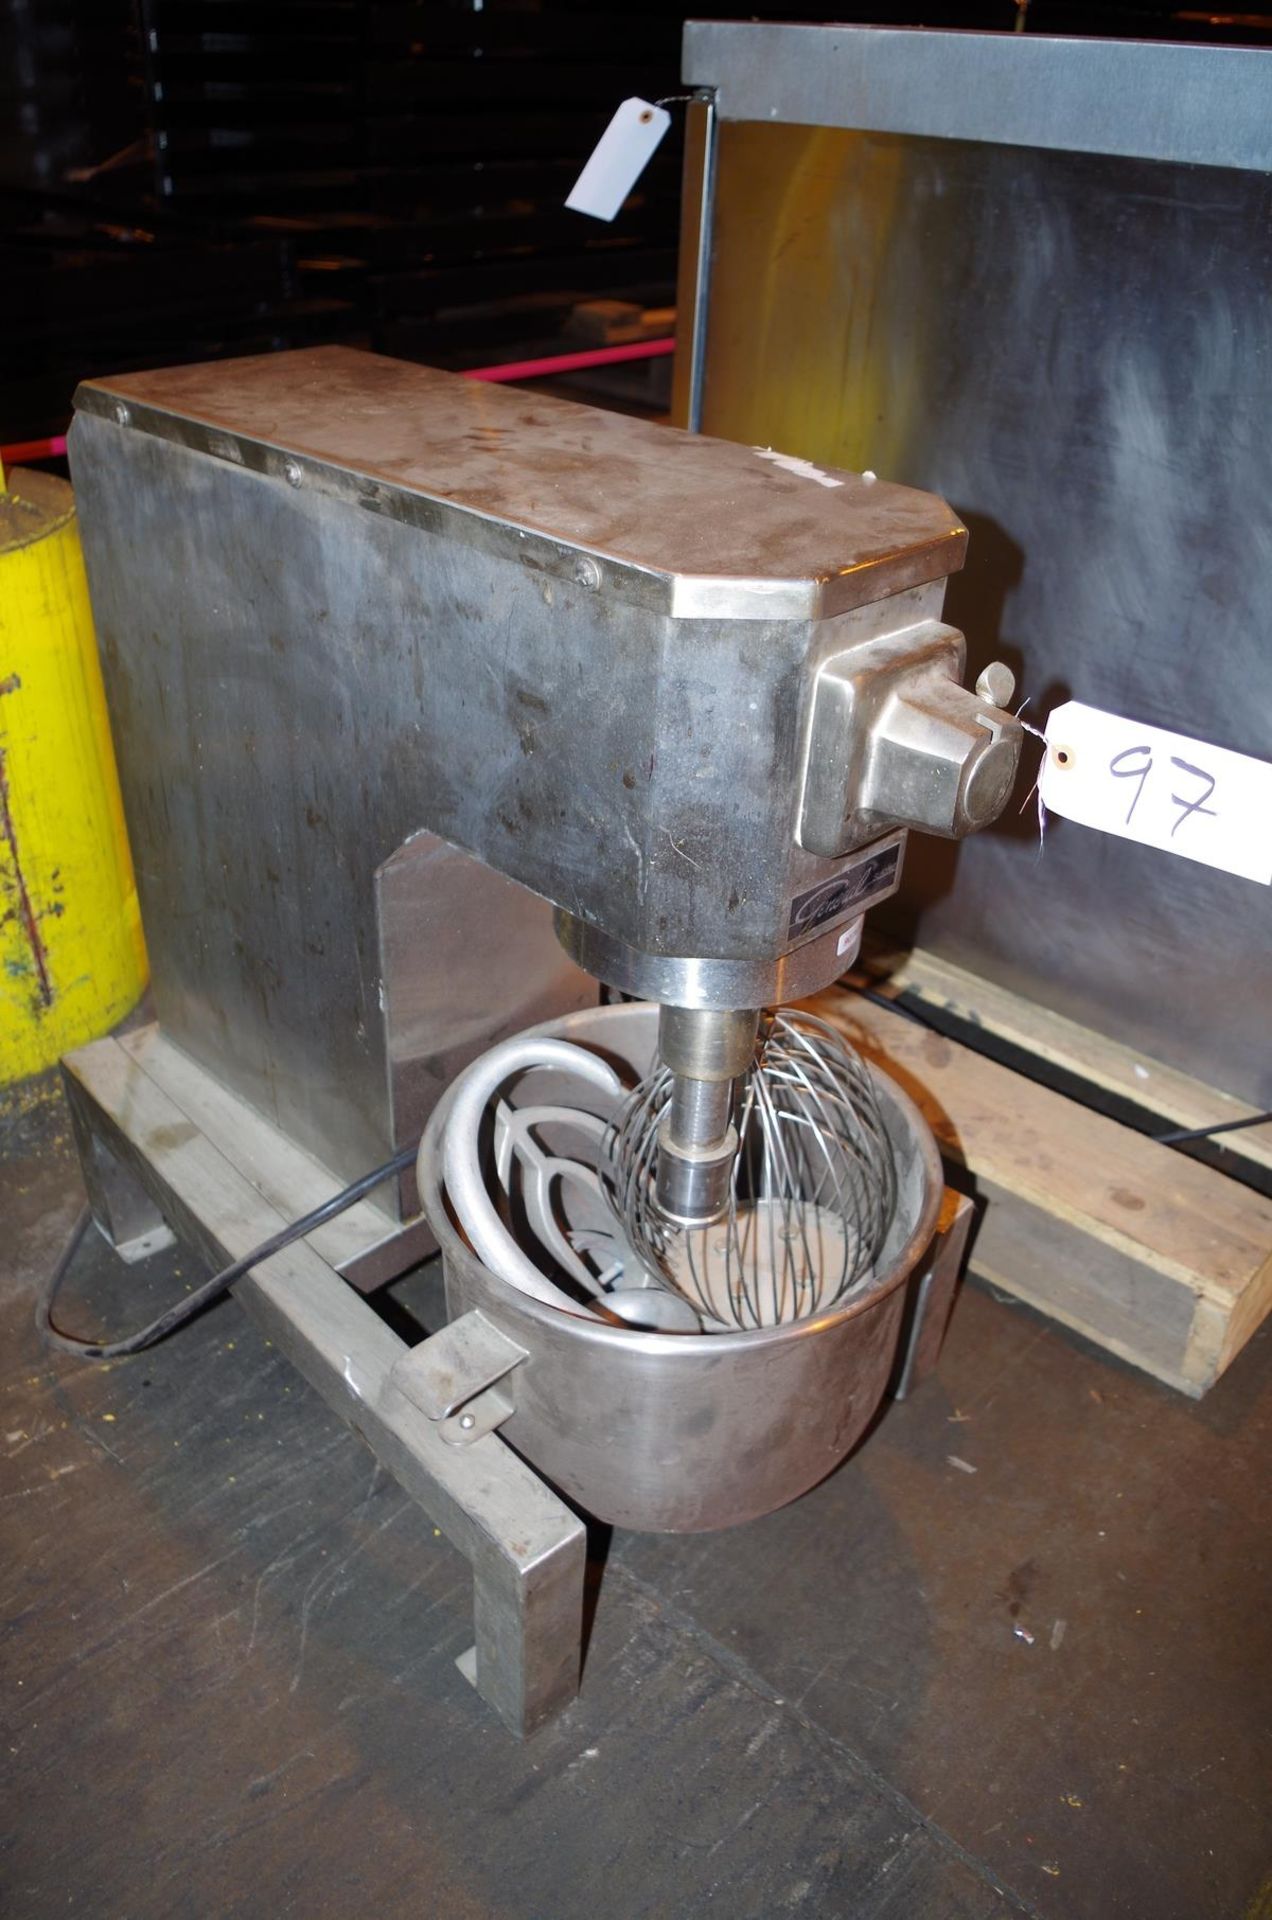 General Slicing Stainless Steel Mixer, Model 20, with stainless bowl and dough hook | Rig Fee: $50